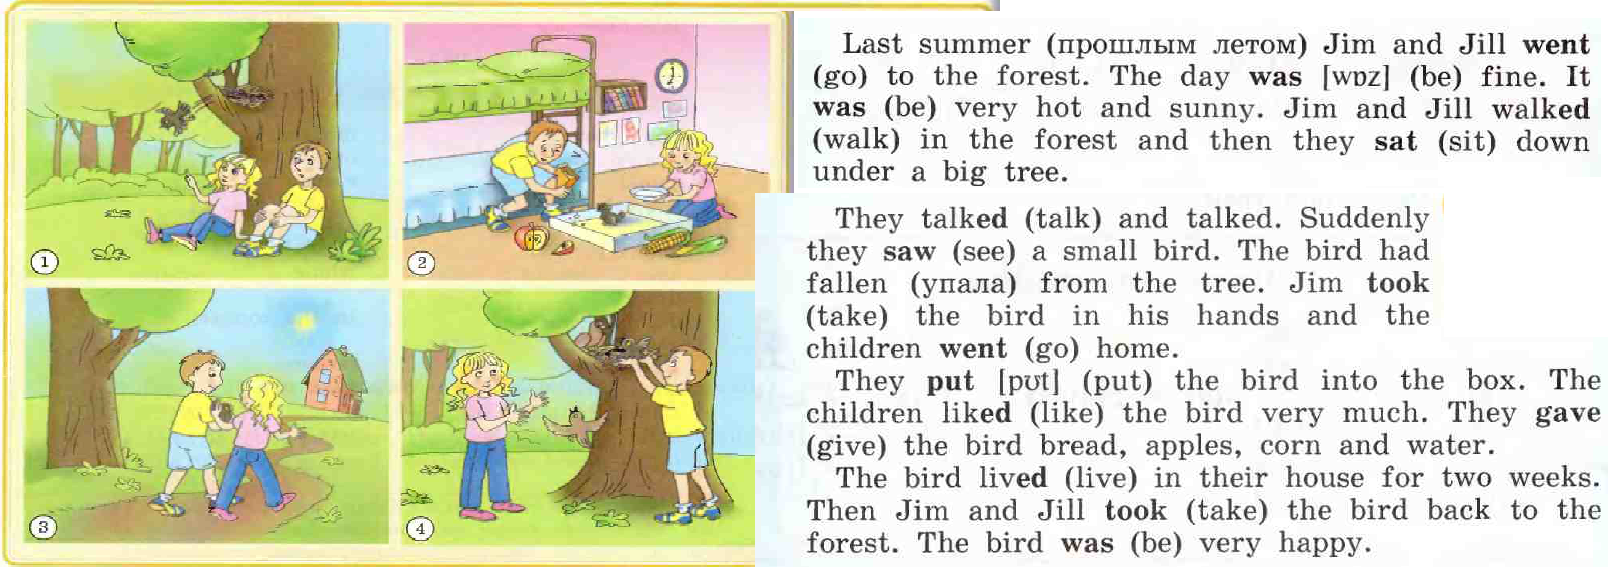 Children like to take. Биболетова was were. Last Summer Jim and Jill went go to the Forest. Last Summer Jim and Jill went. Джим и Джилл биболетова 3 класс.